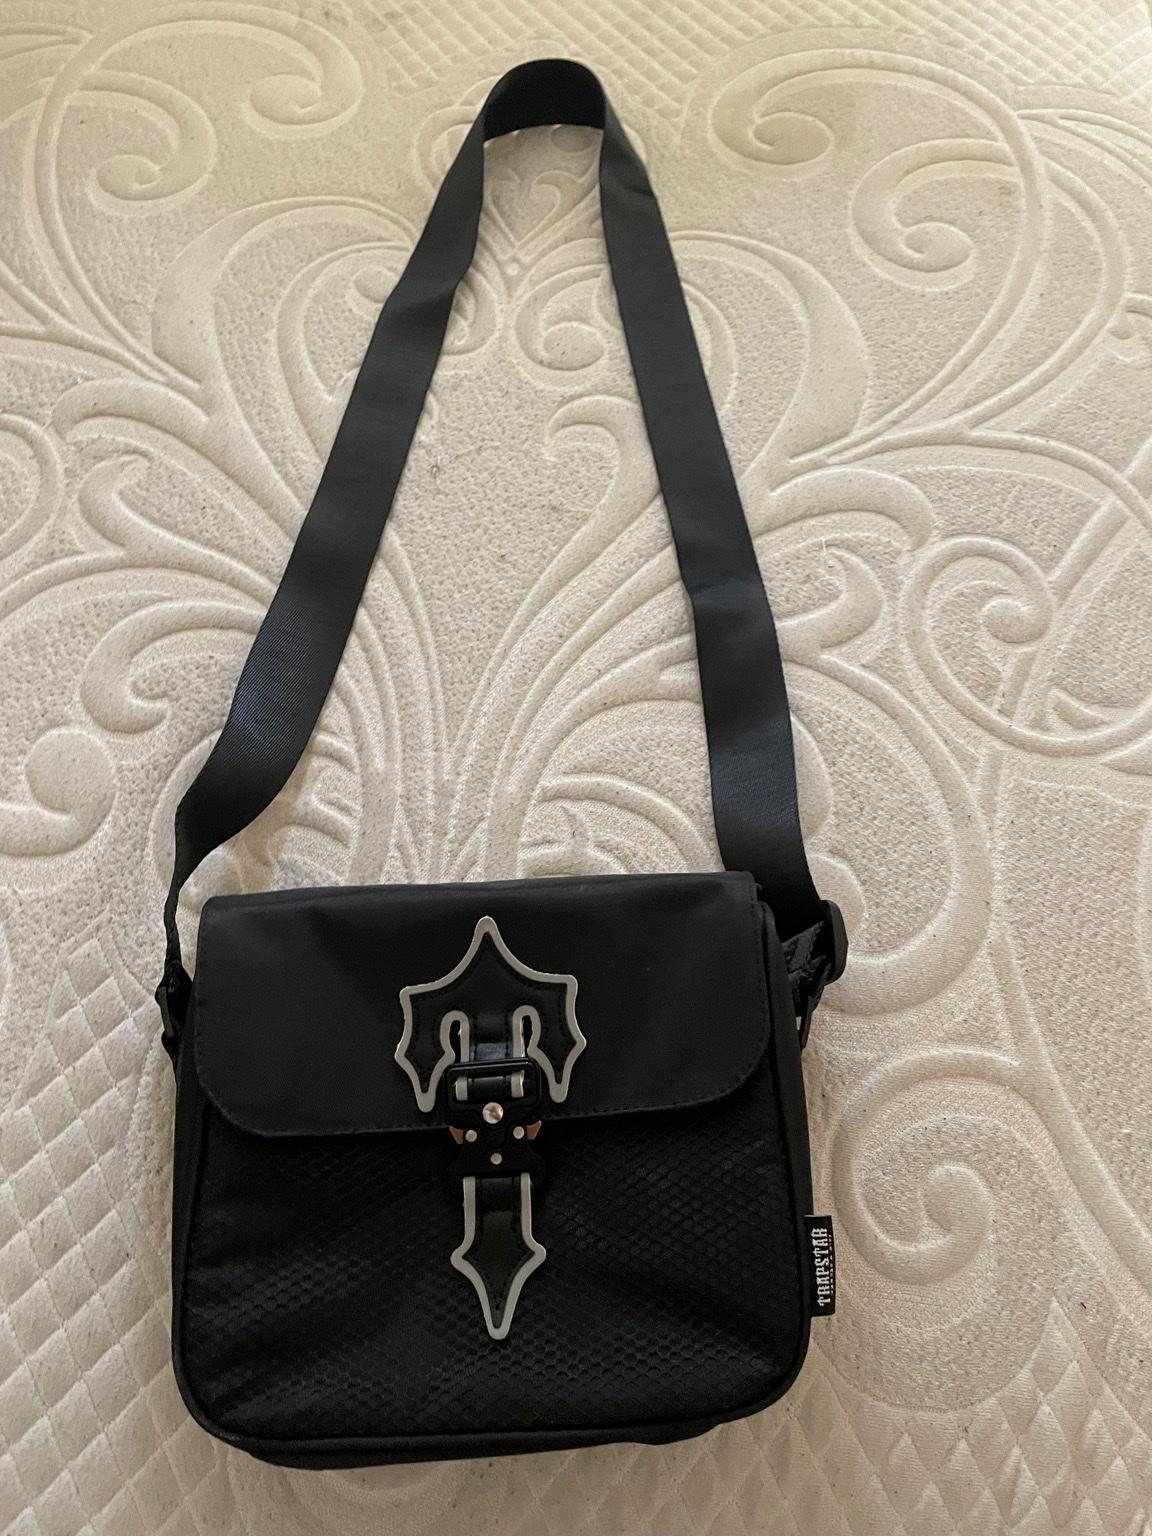 TRAPSTAR BAG 1.0 - BLACK/WHITE in M13 Manchester for £45.00 for sale ...